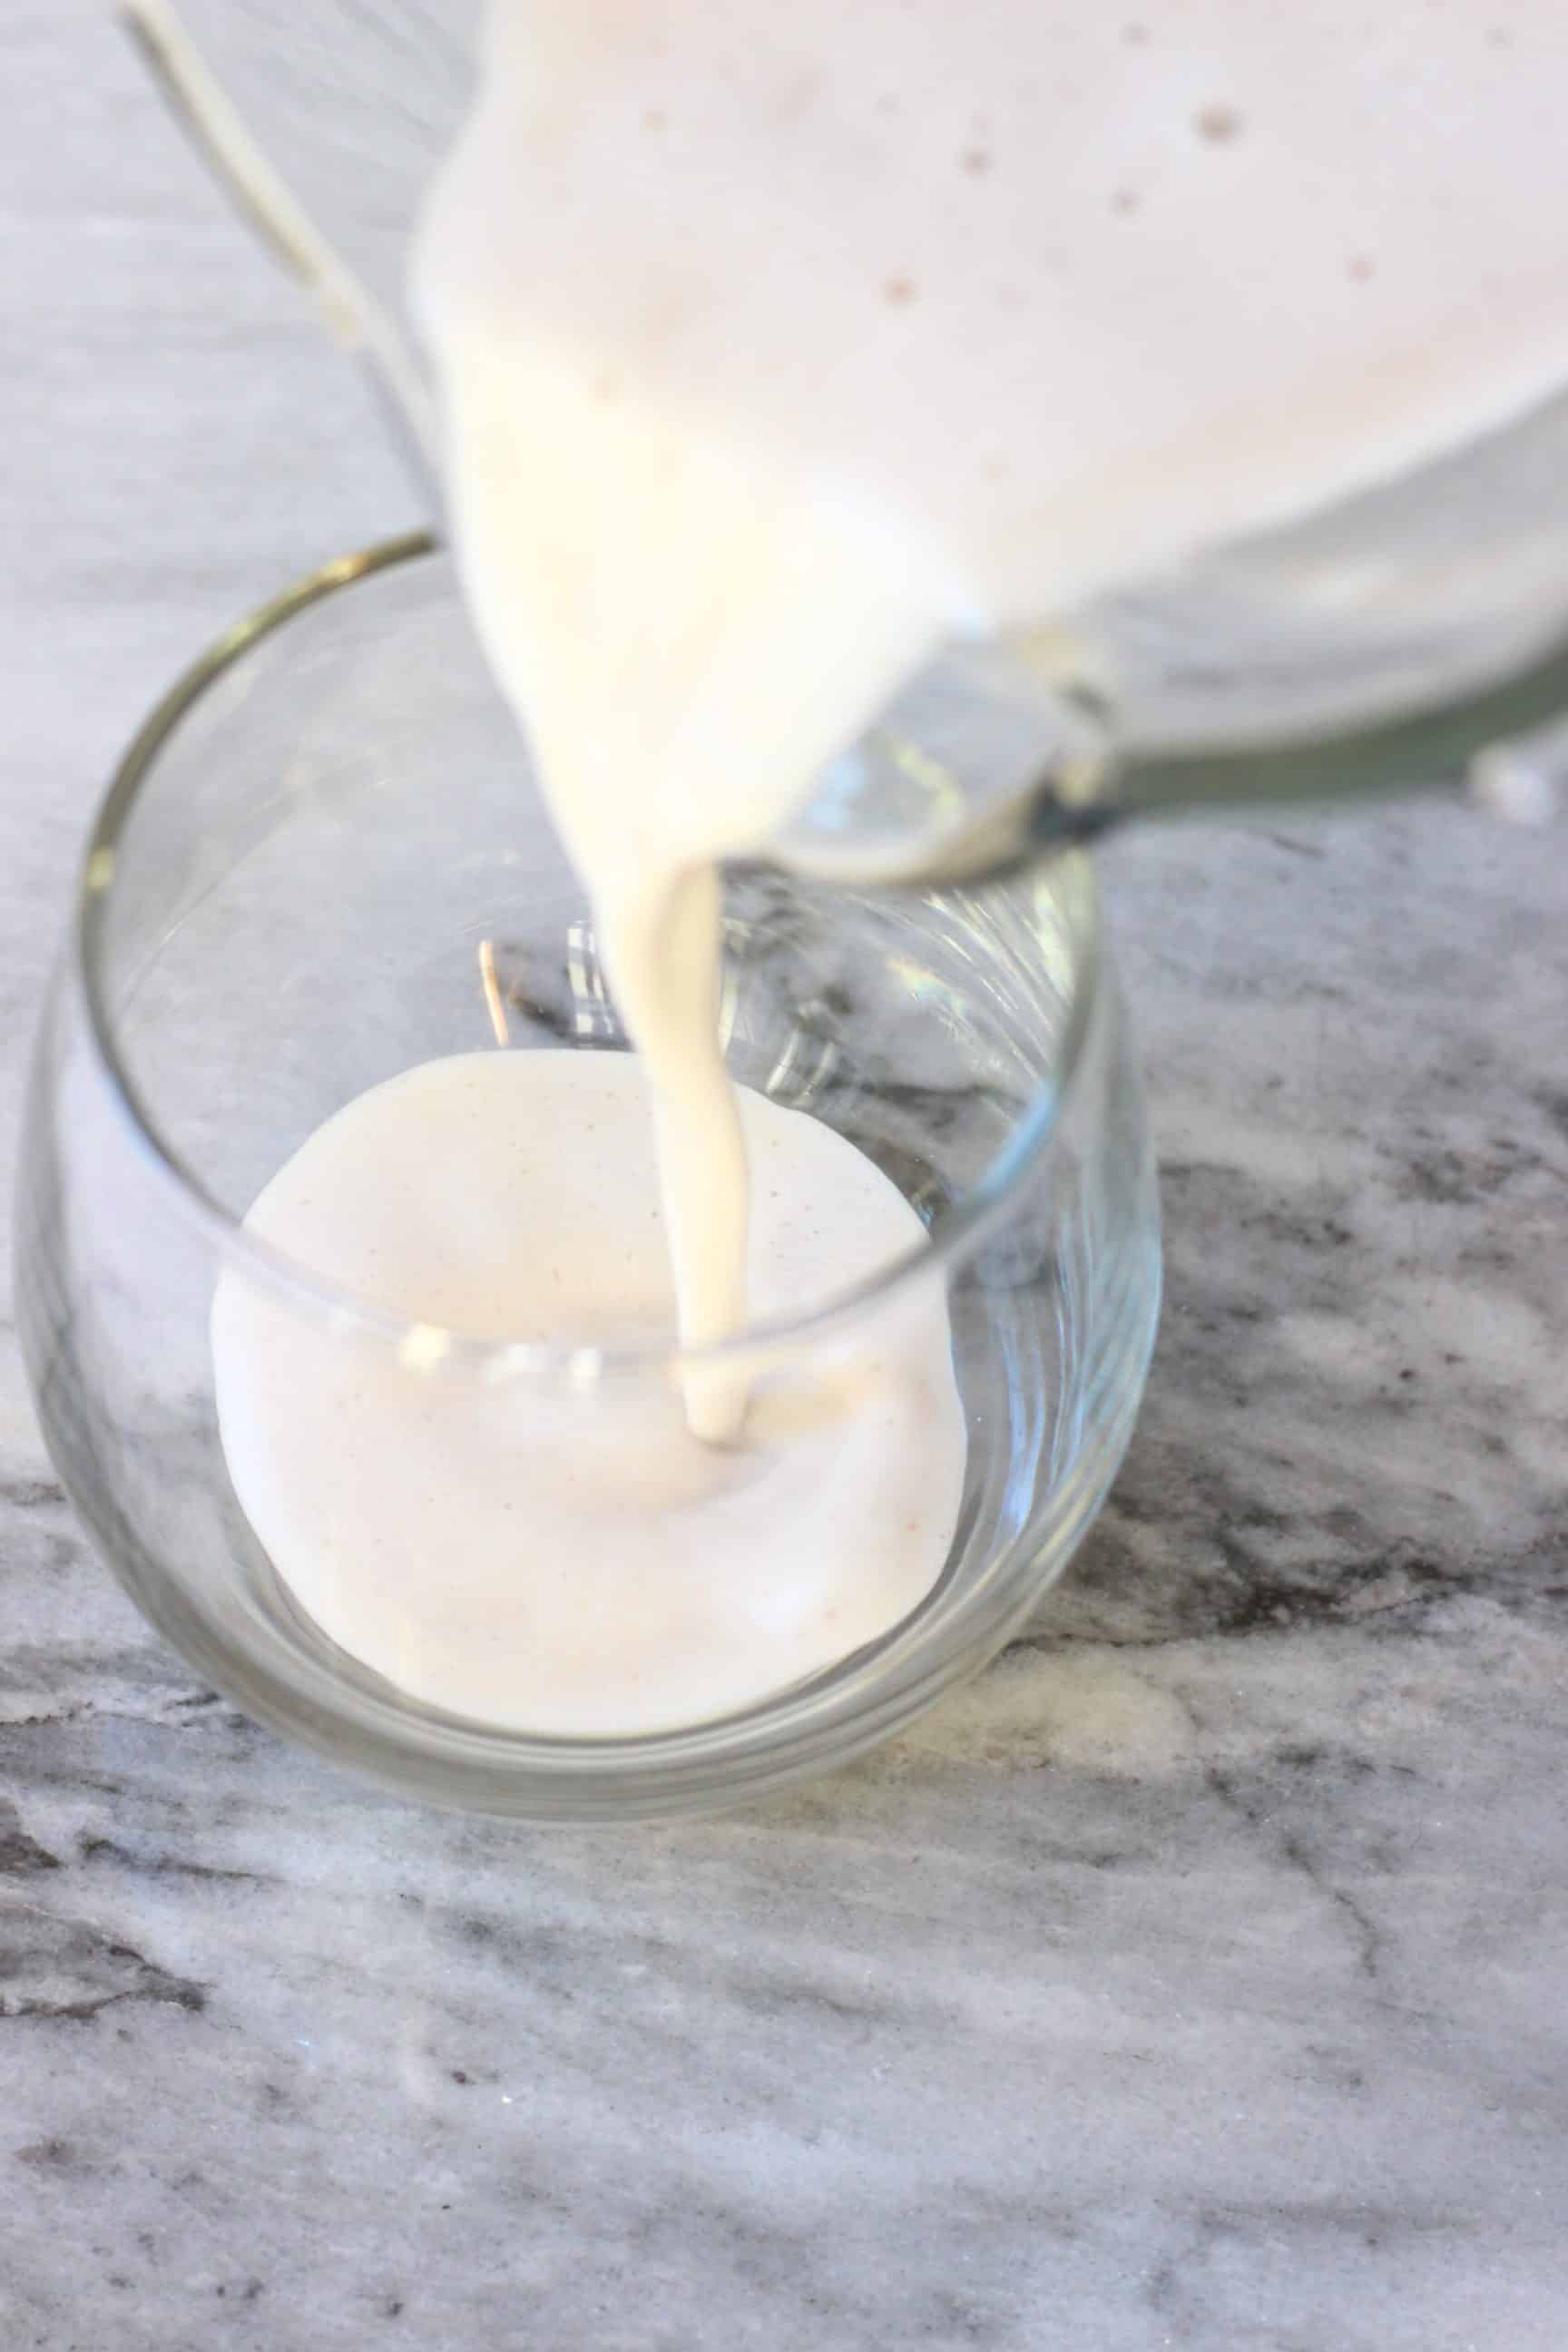 Vegan eggnog being poured into a glass from a blender 